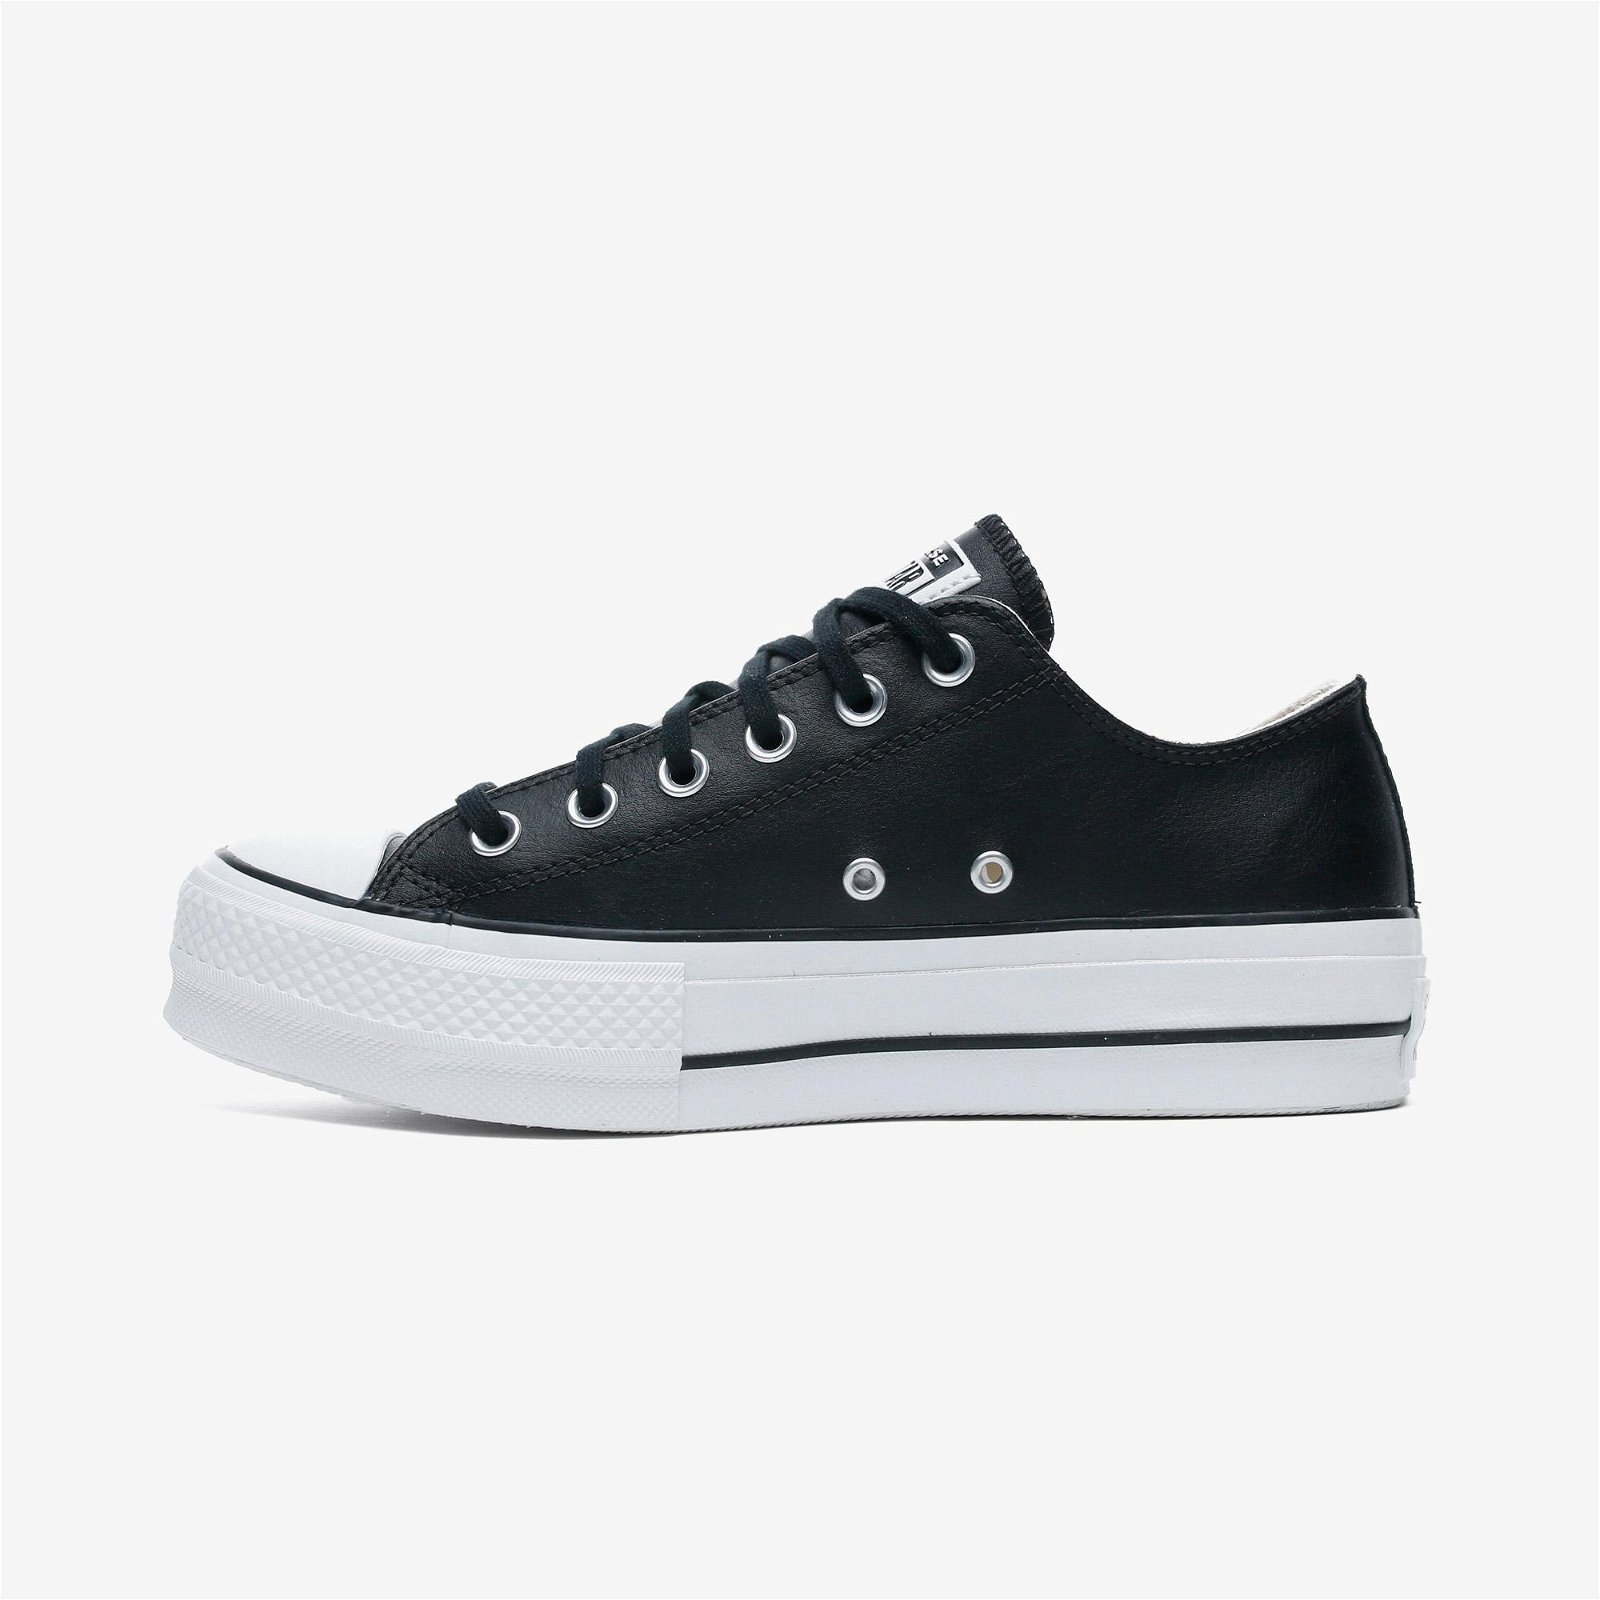  Converse Chuck Taylor All Star Lift Low Top Unisex Siyah Sneaker